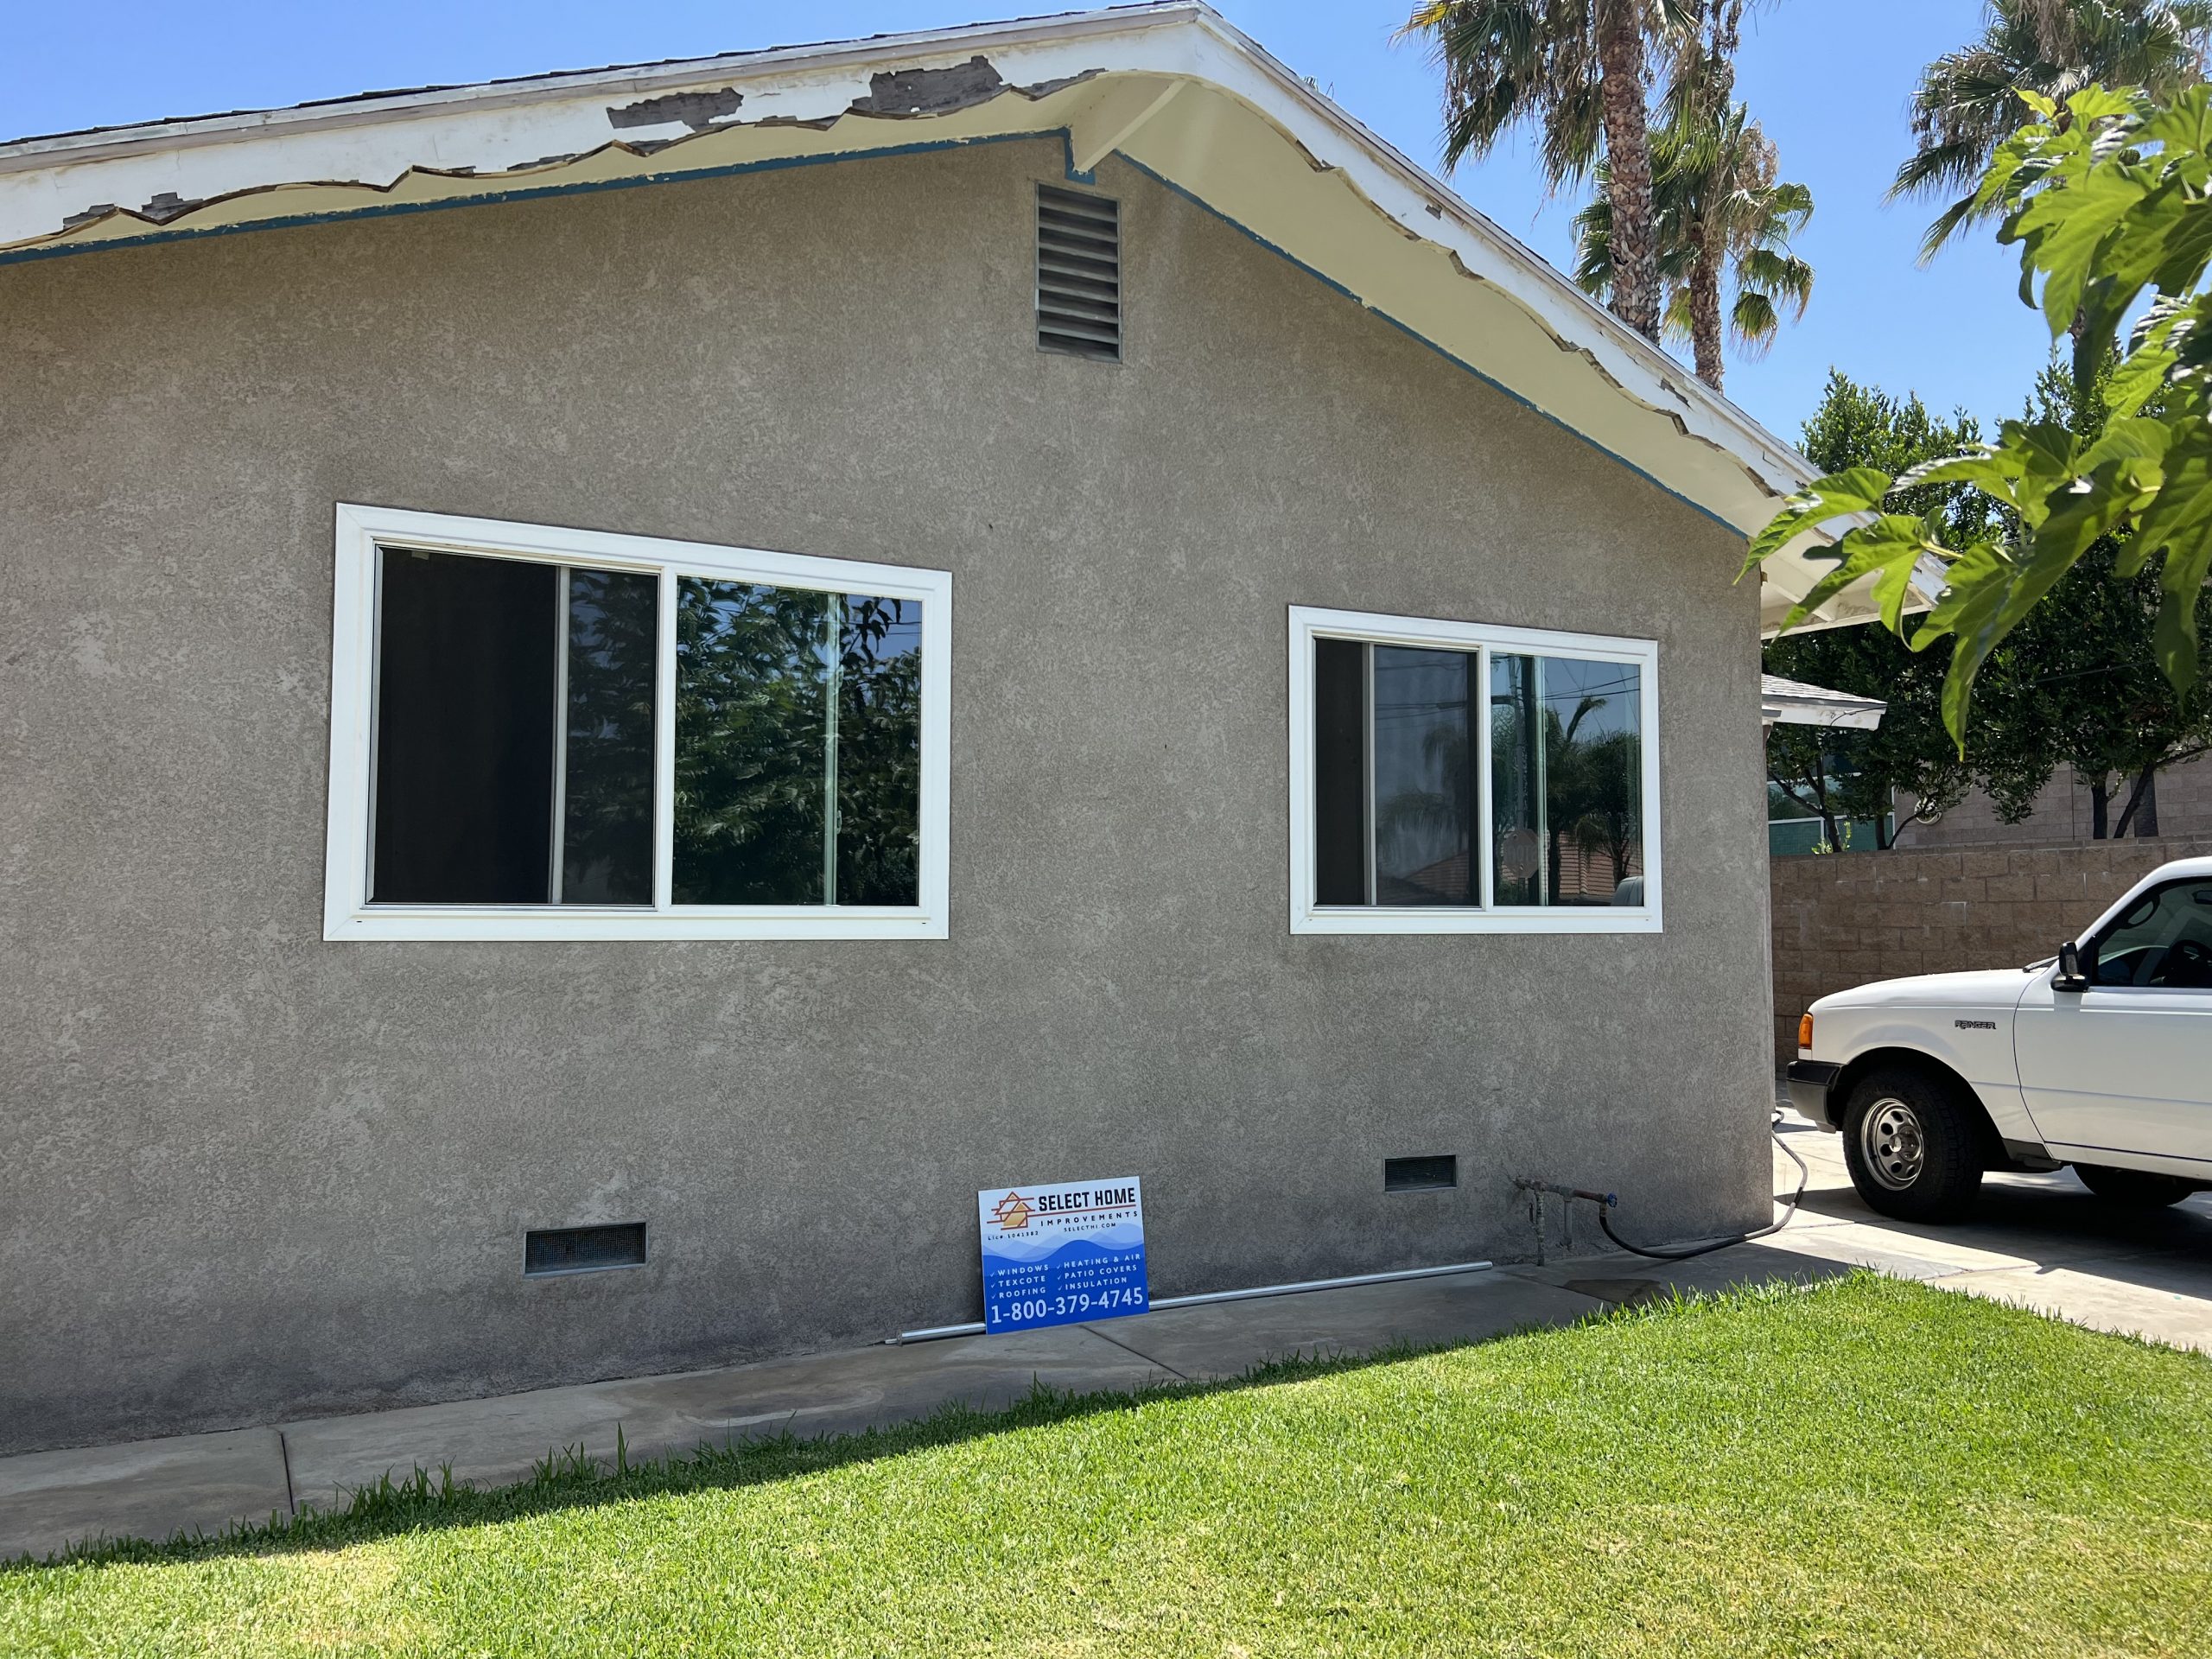 Window Replacement Project in Riverside, CA